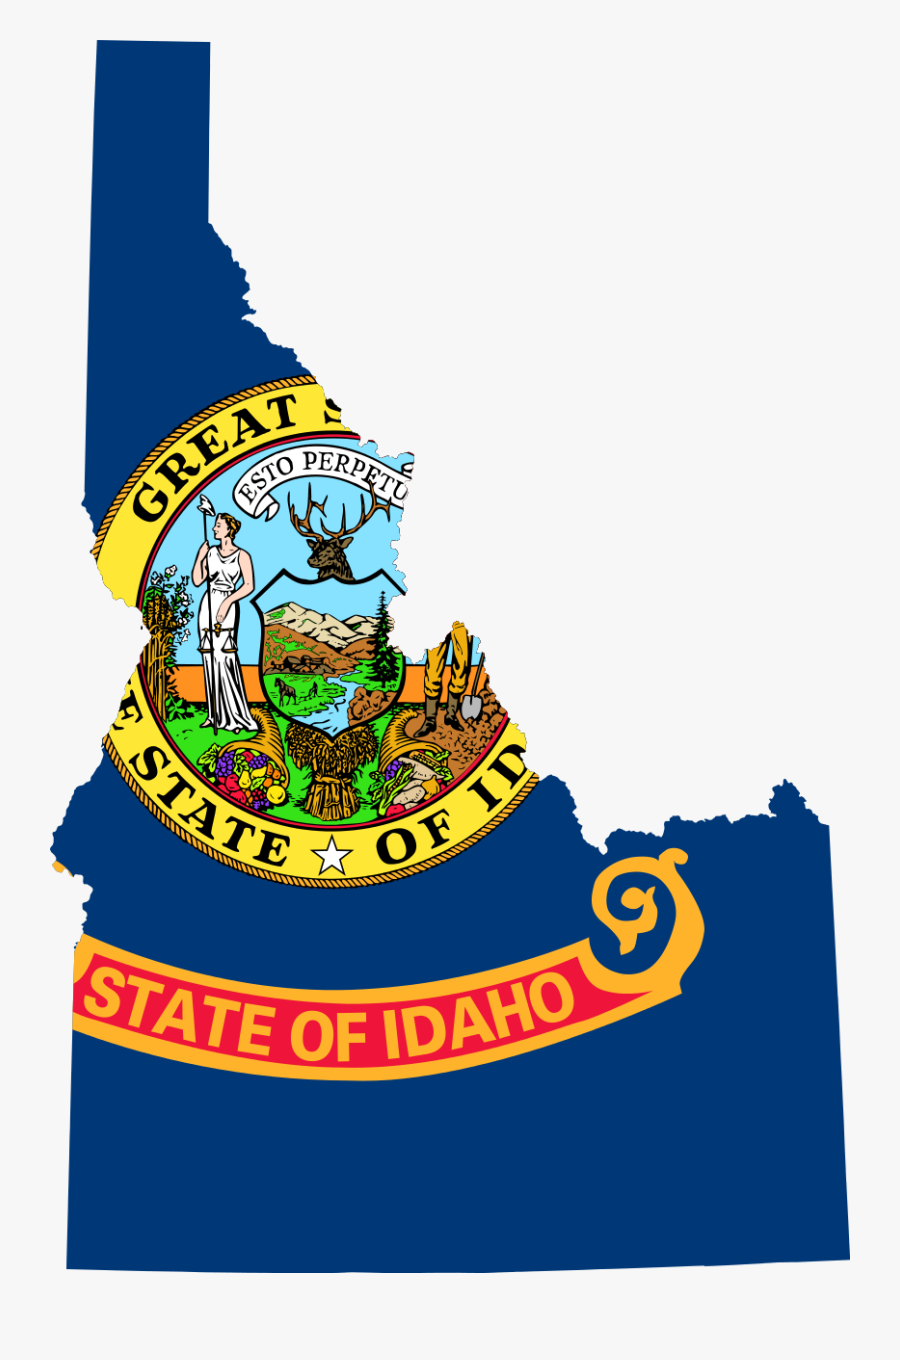 Four More Years - Idaho State Flag Map, Transparent Clipart